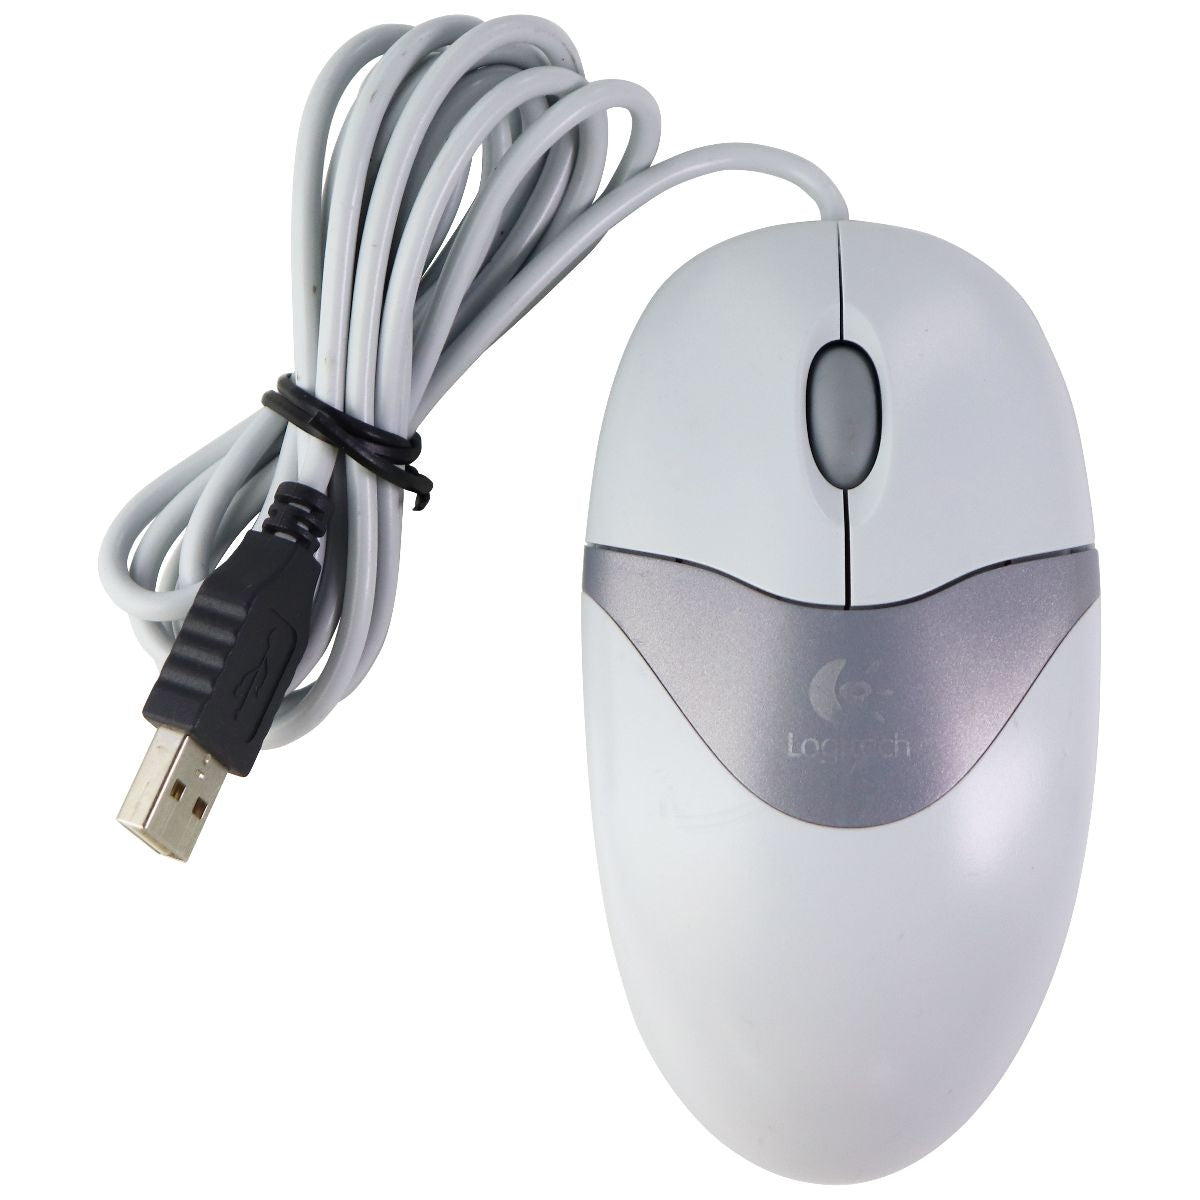 Logitech USB Wired Optical Mouse for Windows PC & More - Gray (M-BT96a) Keyboards/Mice - Mice, Trackballs & Touchpads Logitech    - Simple Cell Bulk Wholesale Pricing - USA Seller